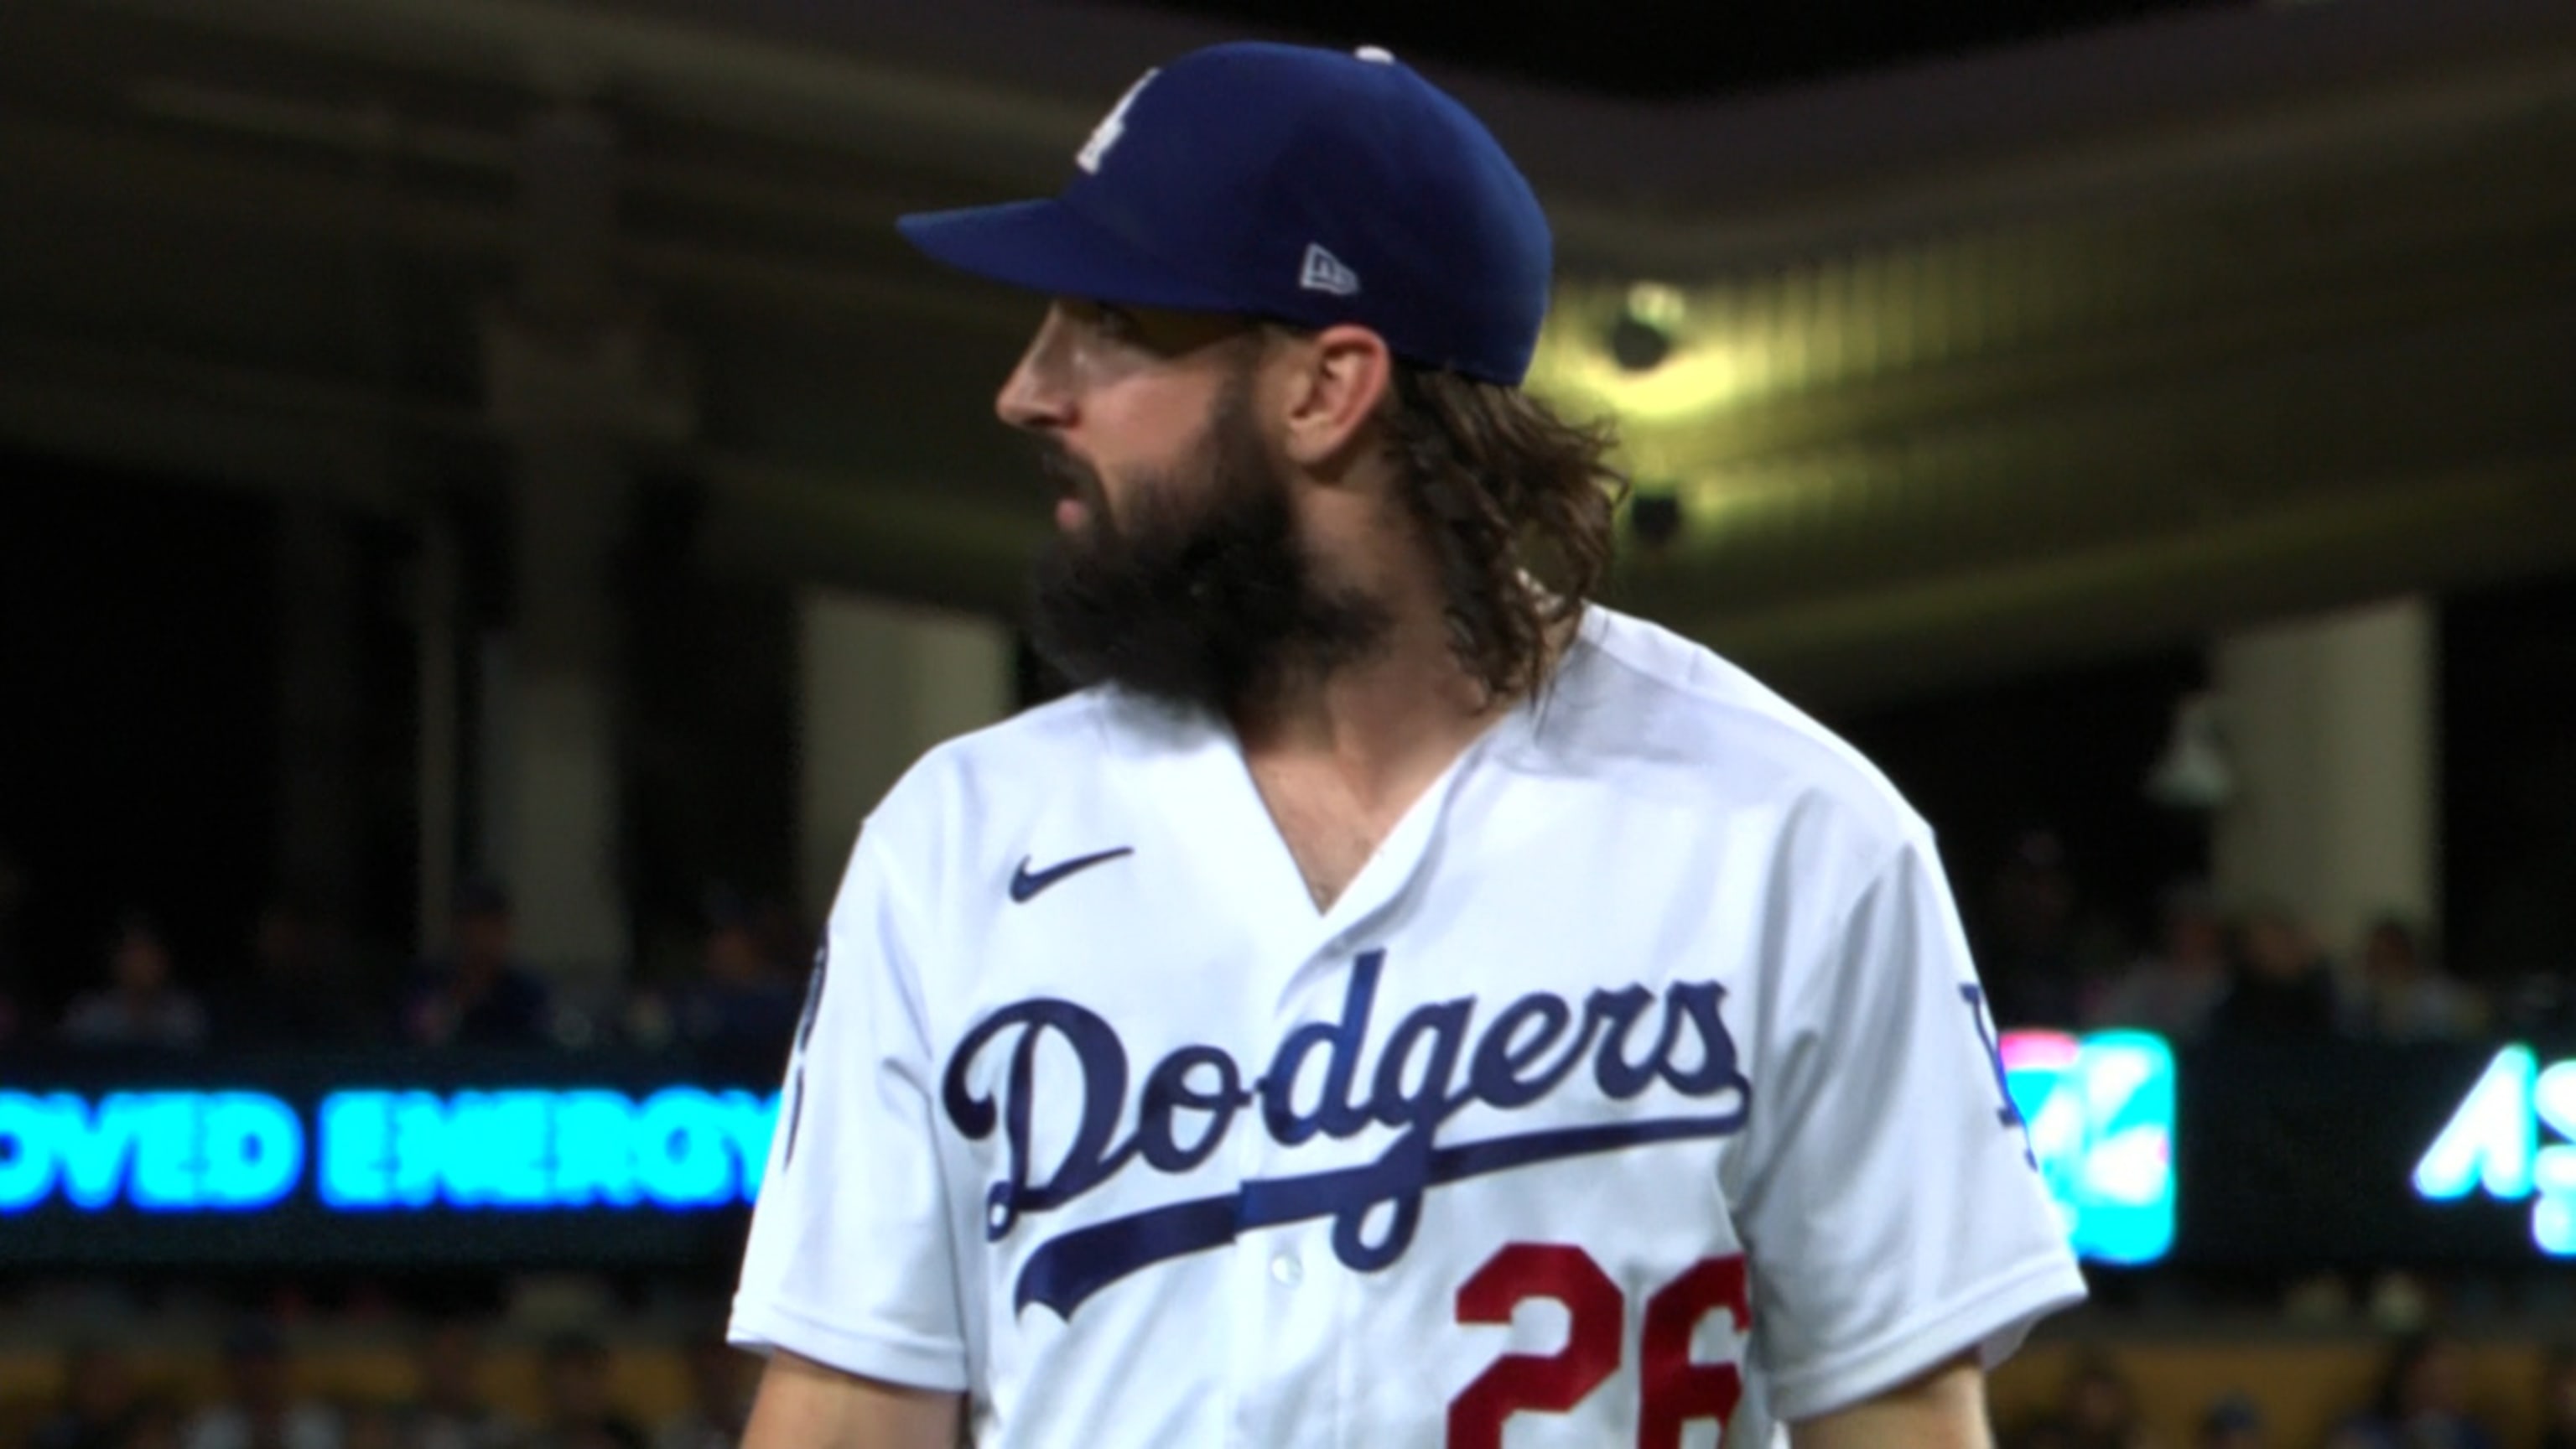 Tony Gonsolin Came Out For Dodger Night At LA Kings Game